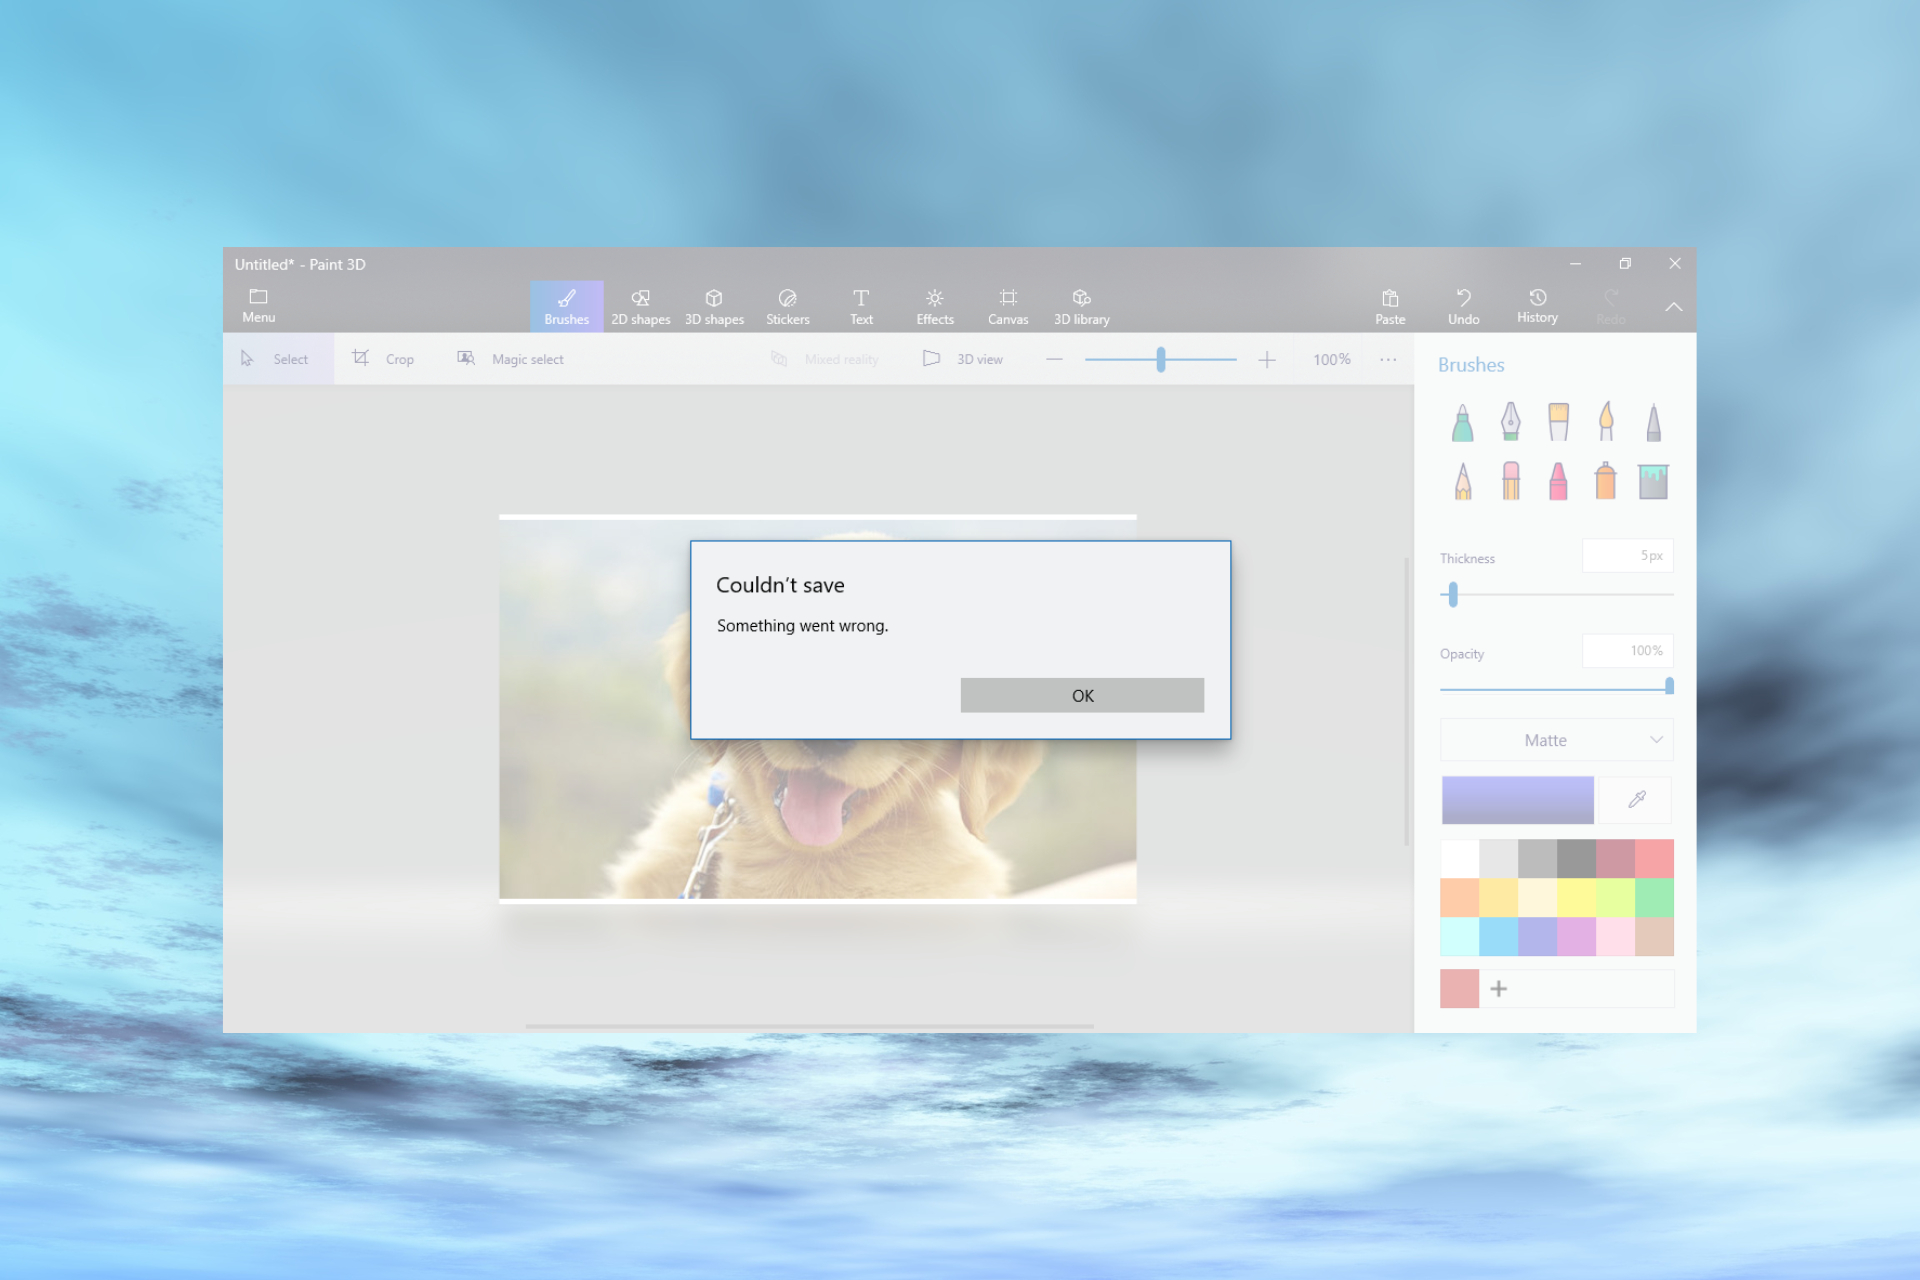 WHAt to do if Paint 3D can't save images